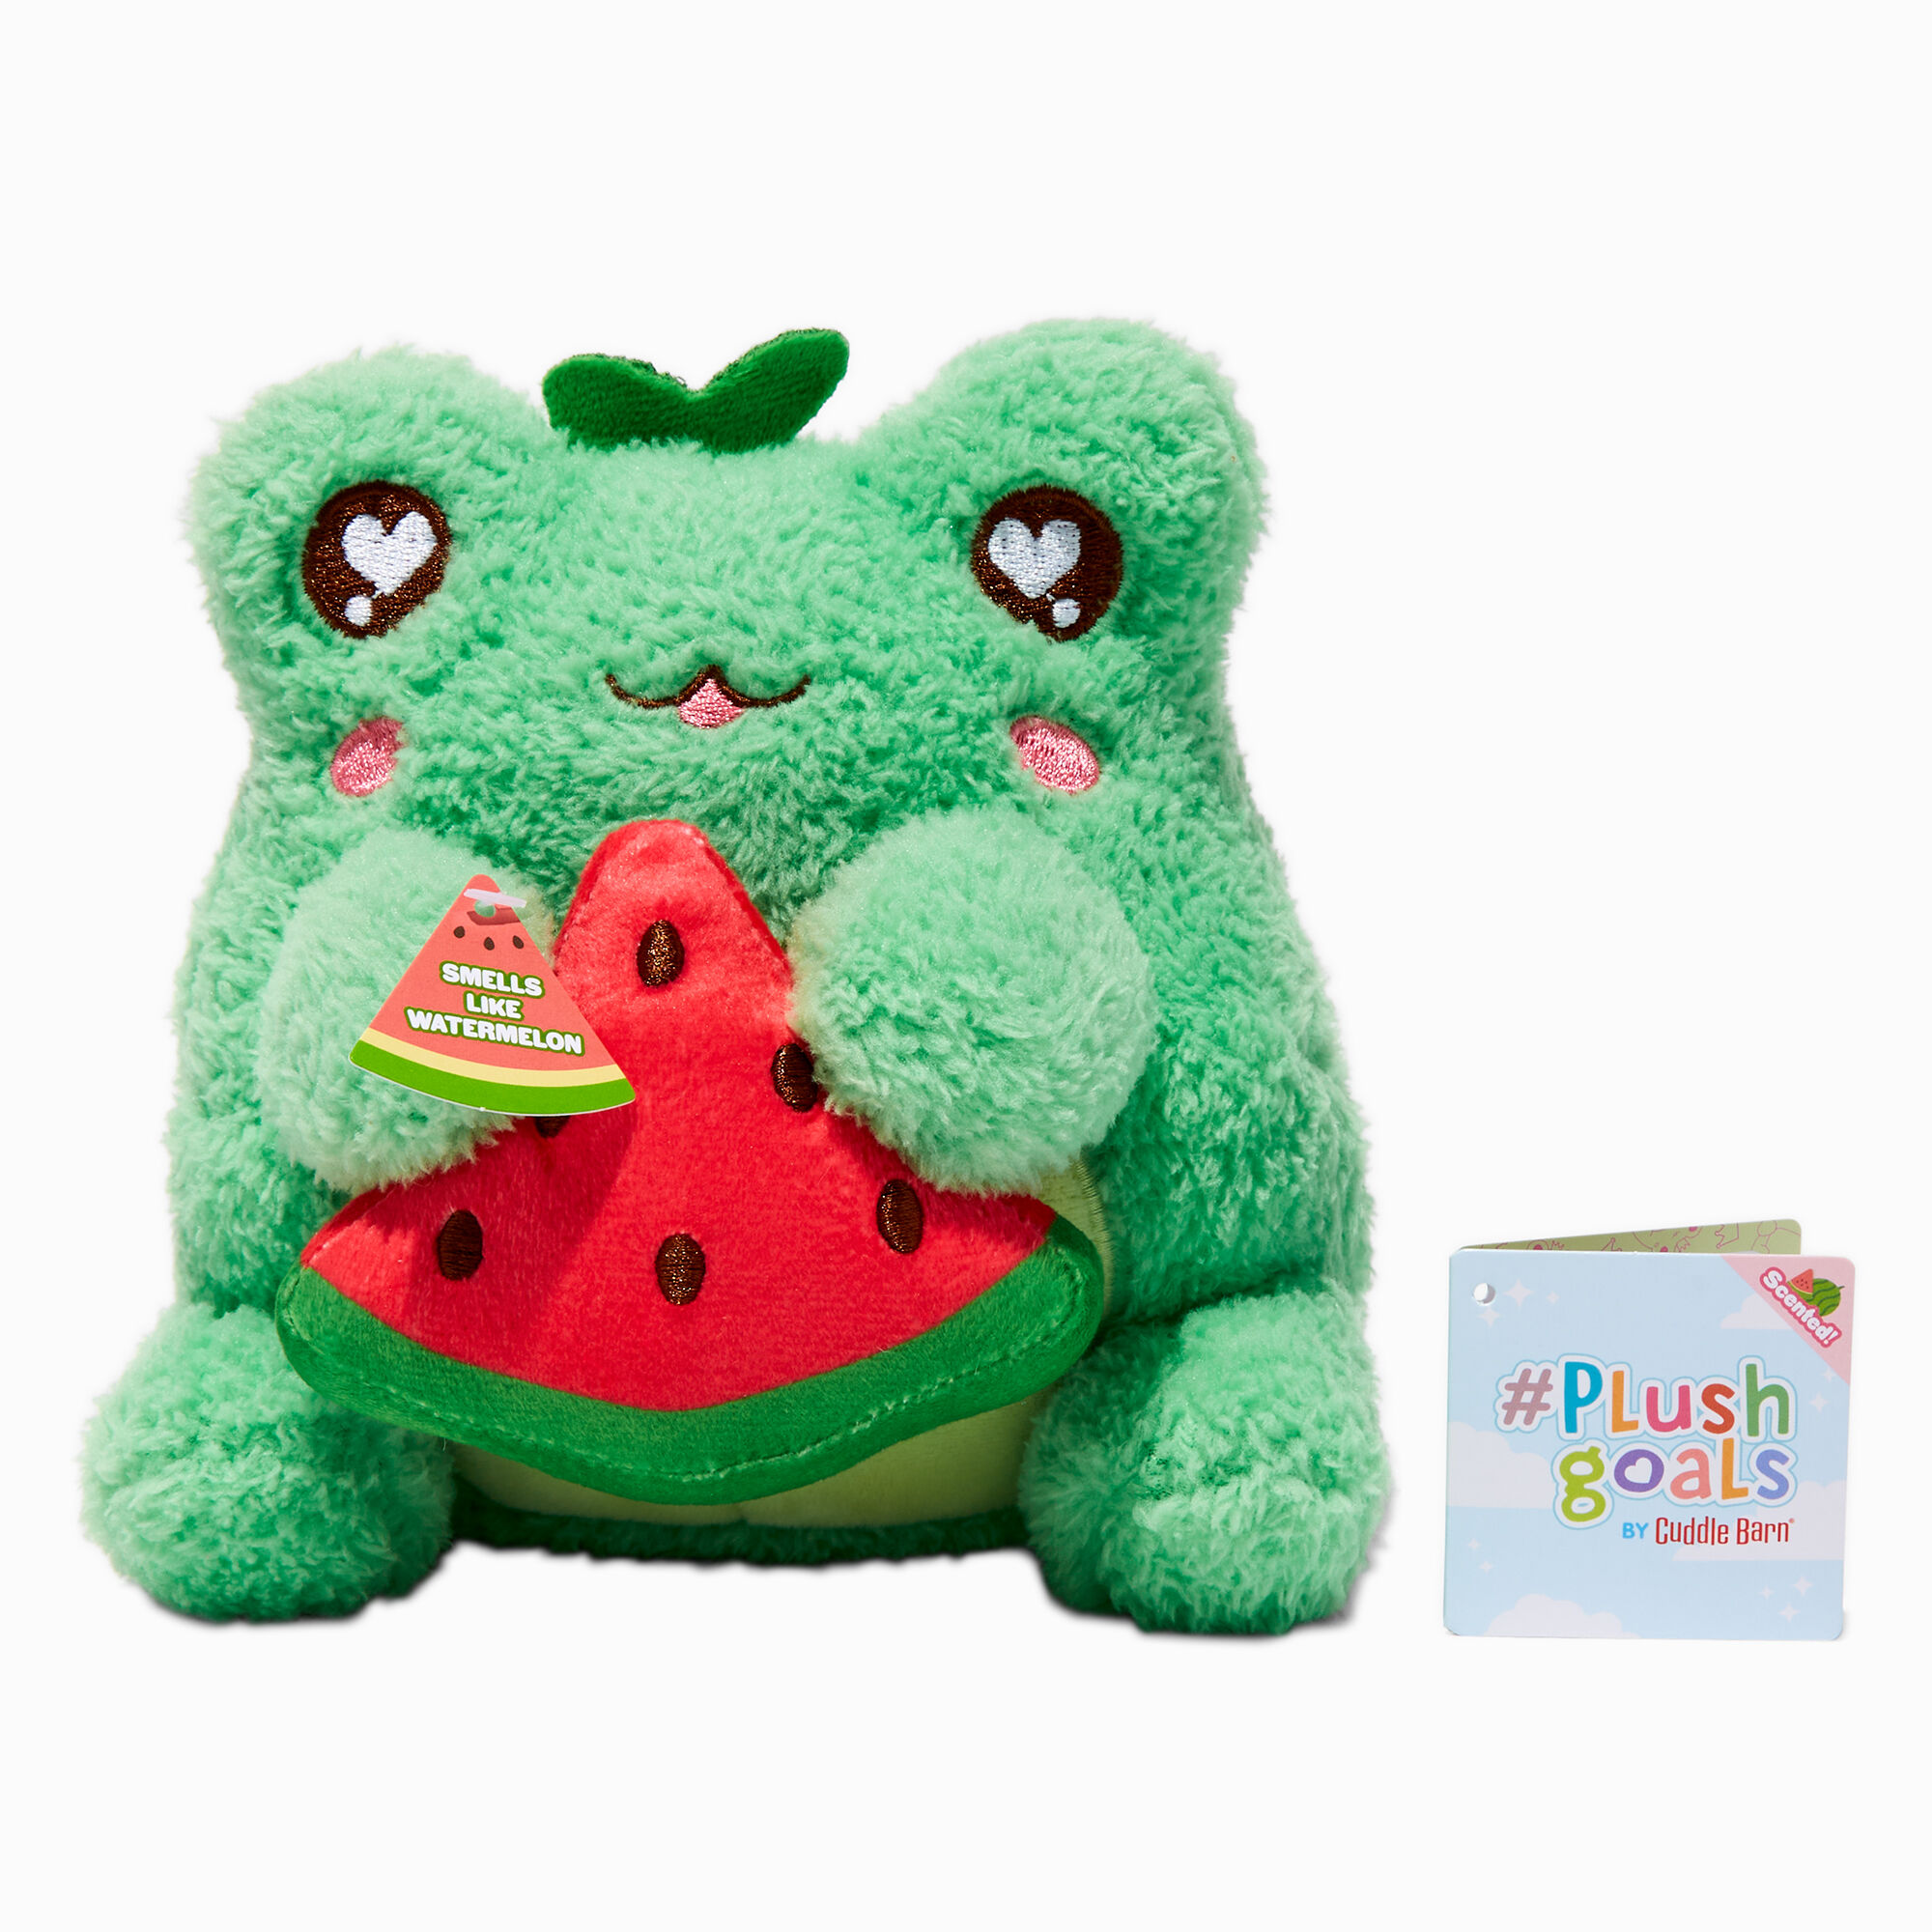 View Claires plush Goals By Cuddle Barn 9 Watermelon Wawa Plush Toy information